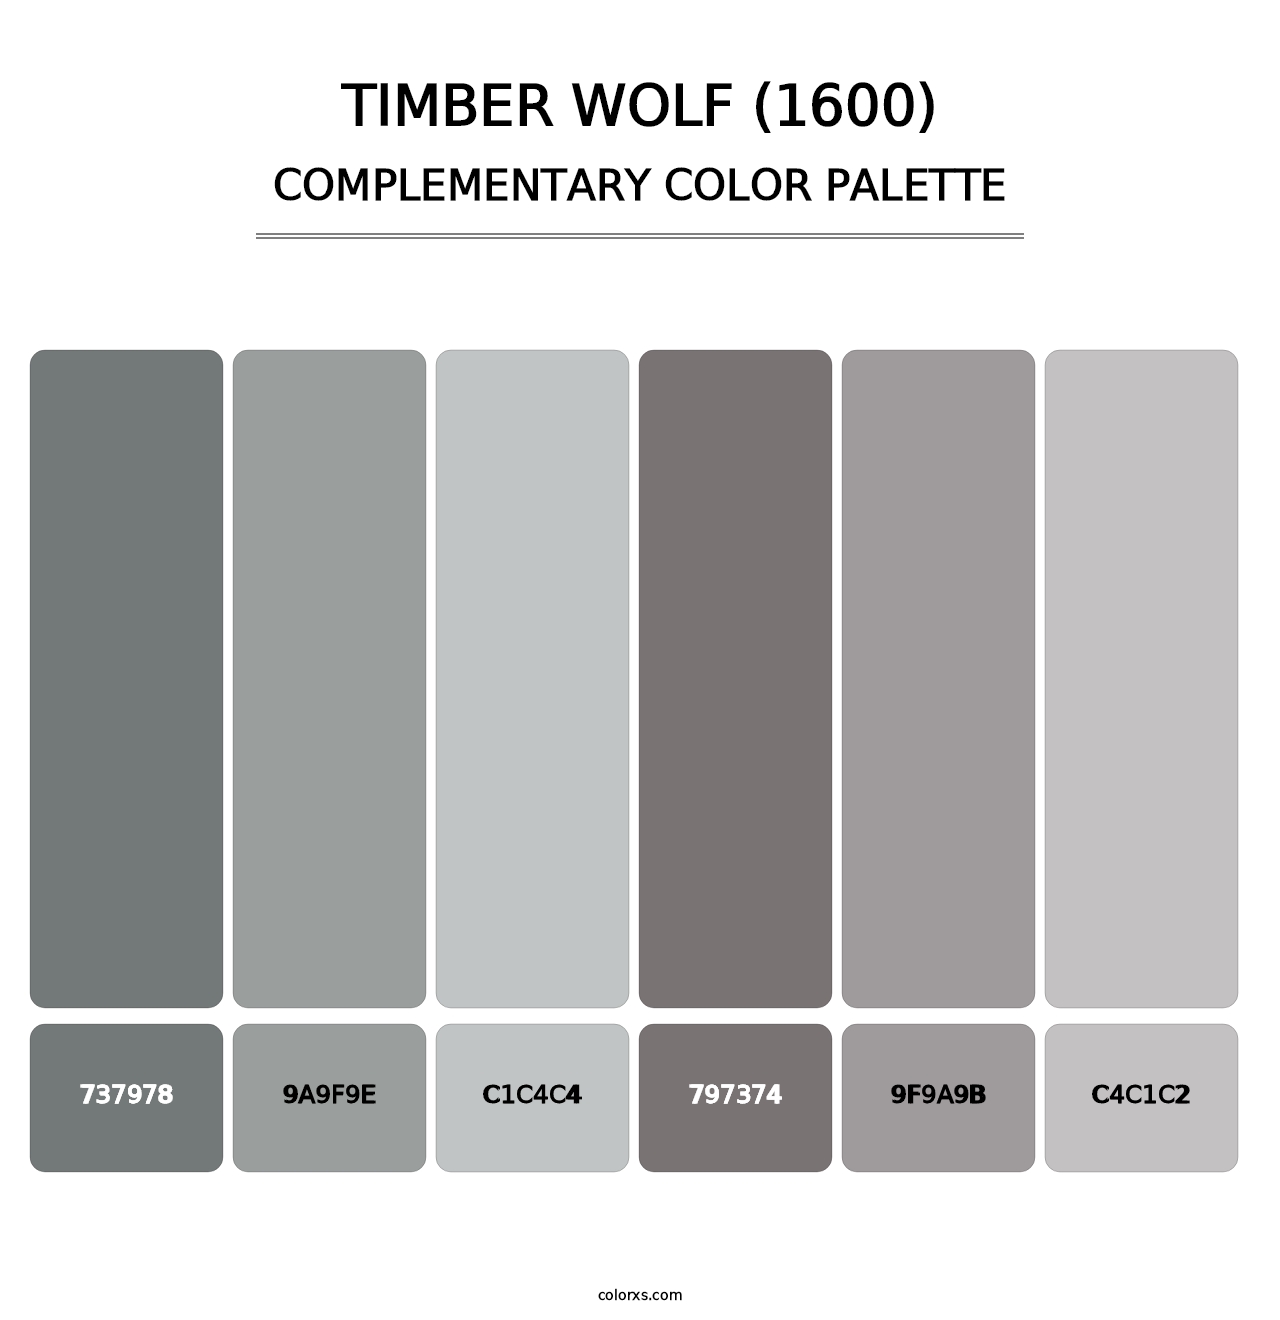 Timber Wolf (1600) - Complementary Color Palette